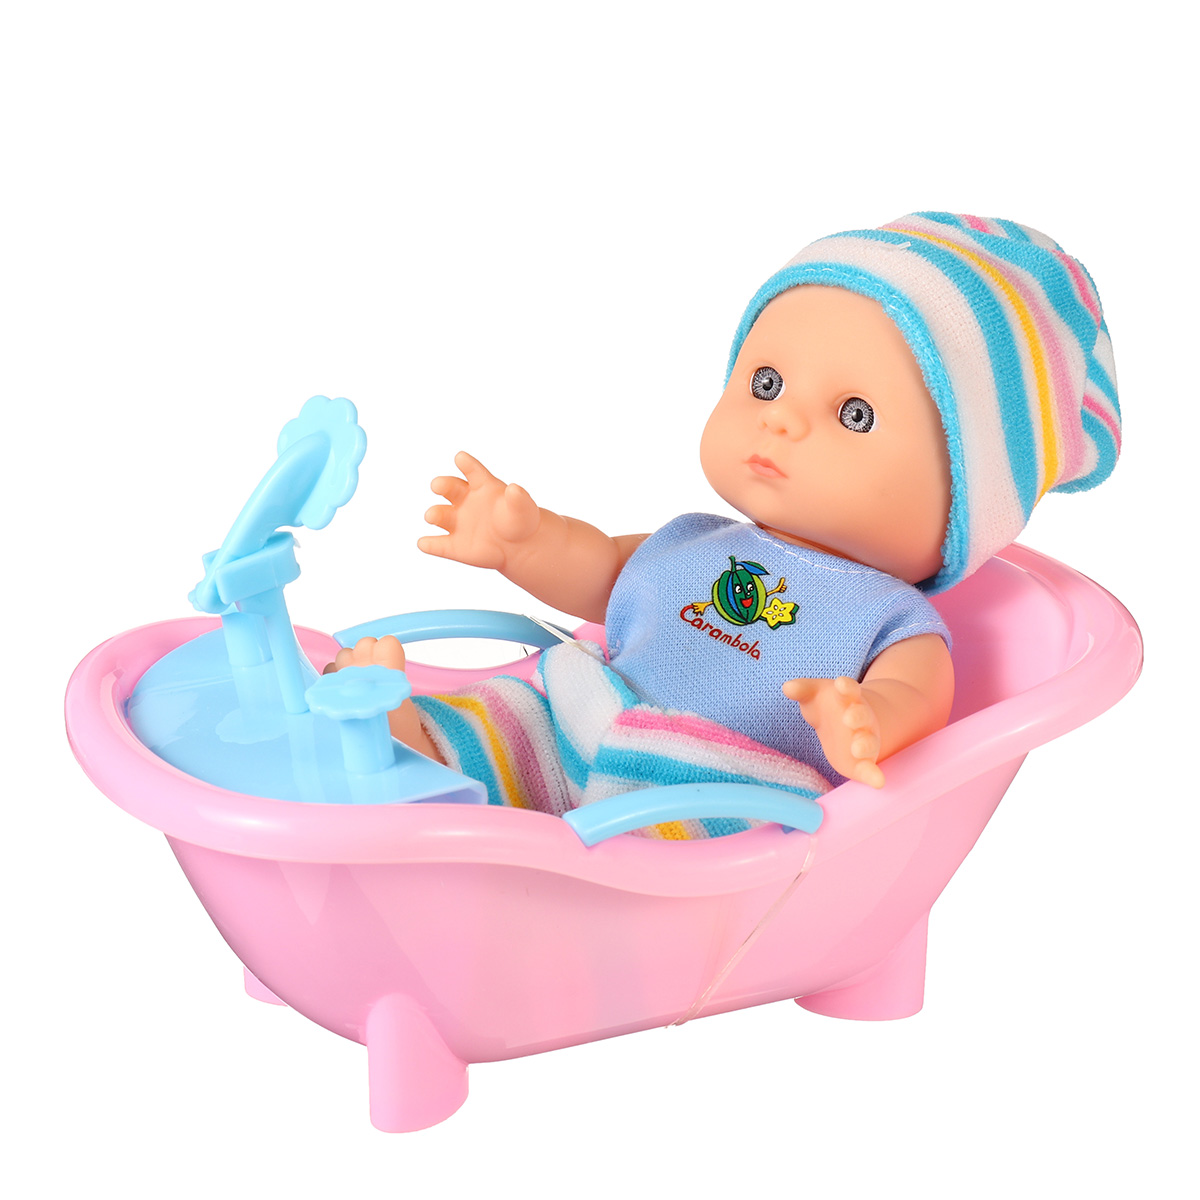 Simulation-Baby-3D-Creative-Cute-Doll-Play-House-Toy-Doll-Vinyl-Doll-Gift-1818656-15